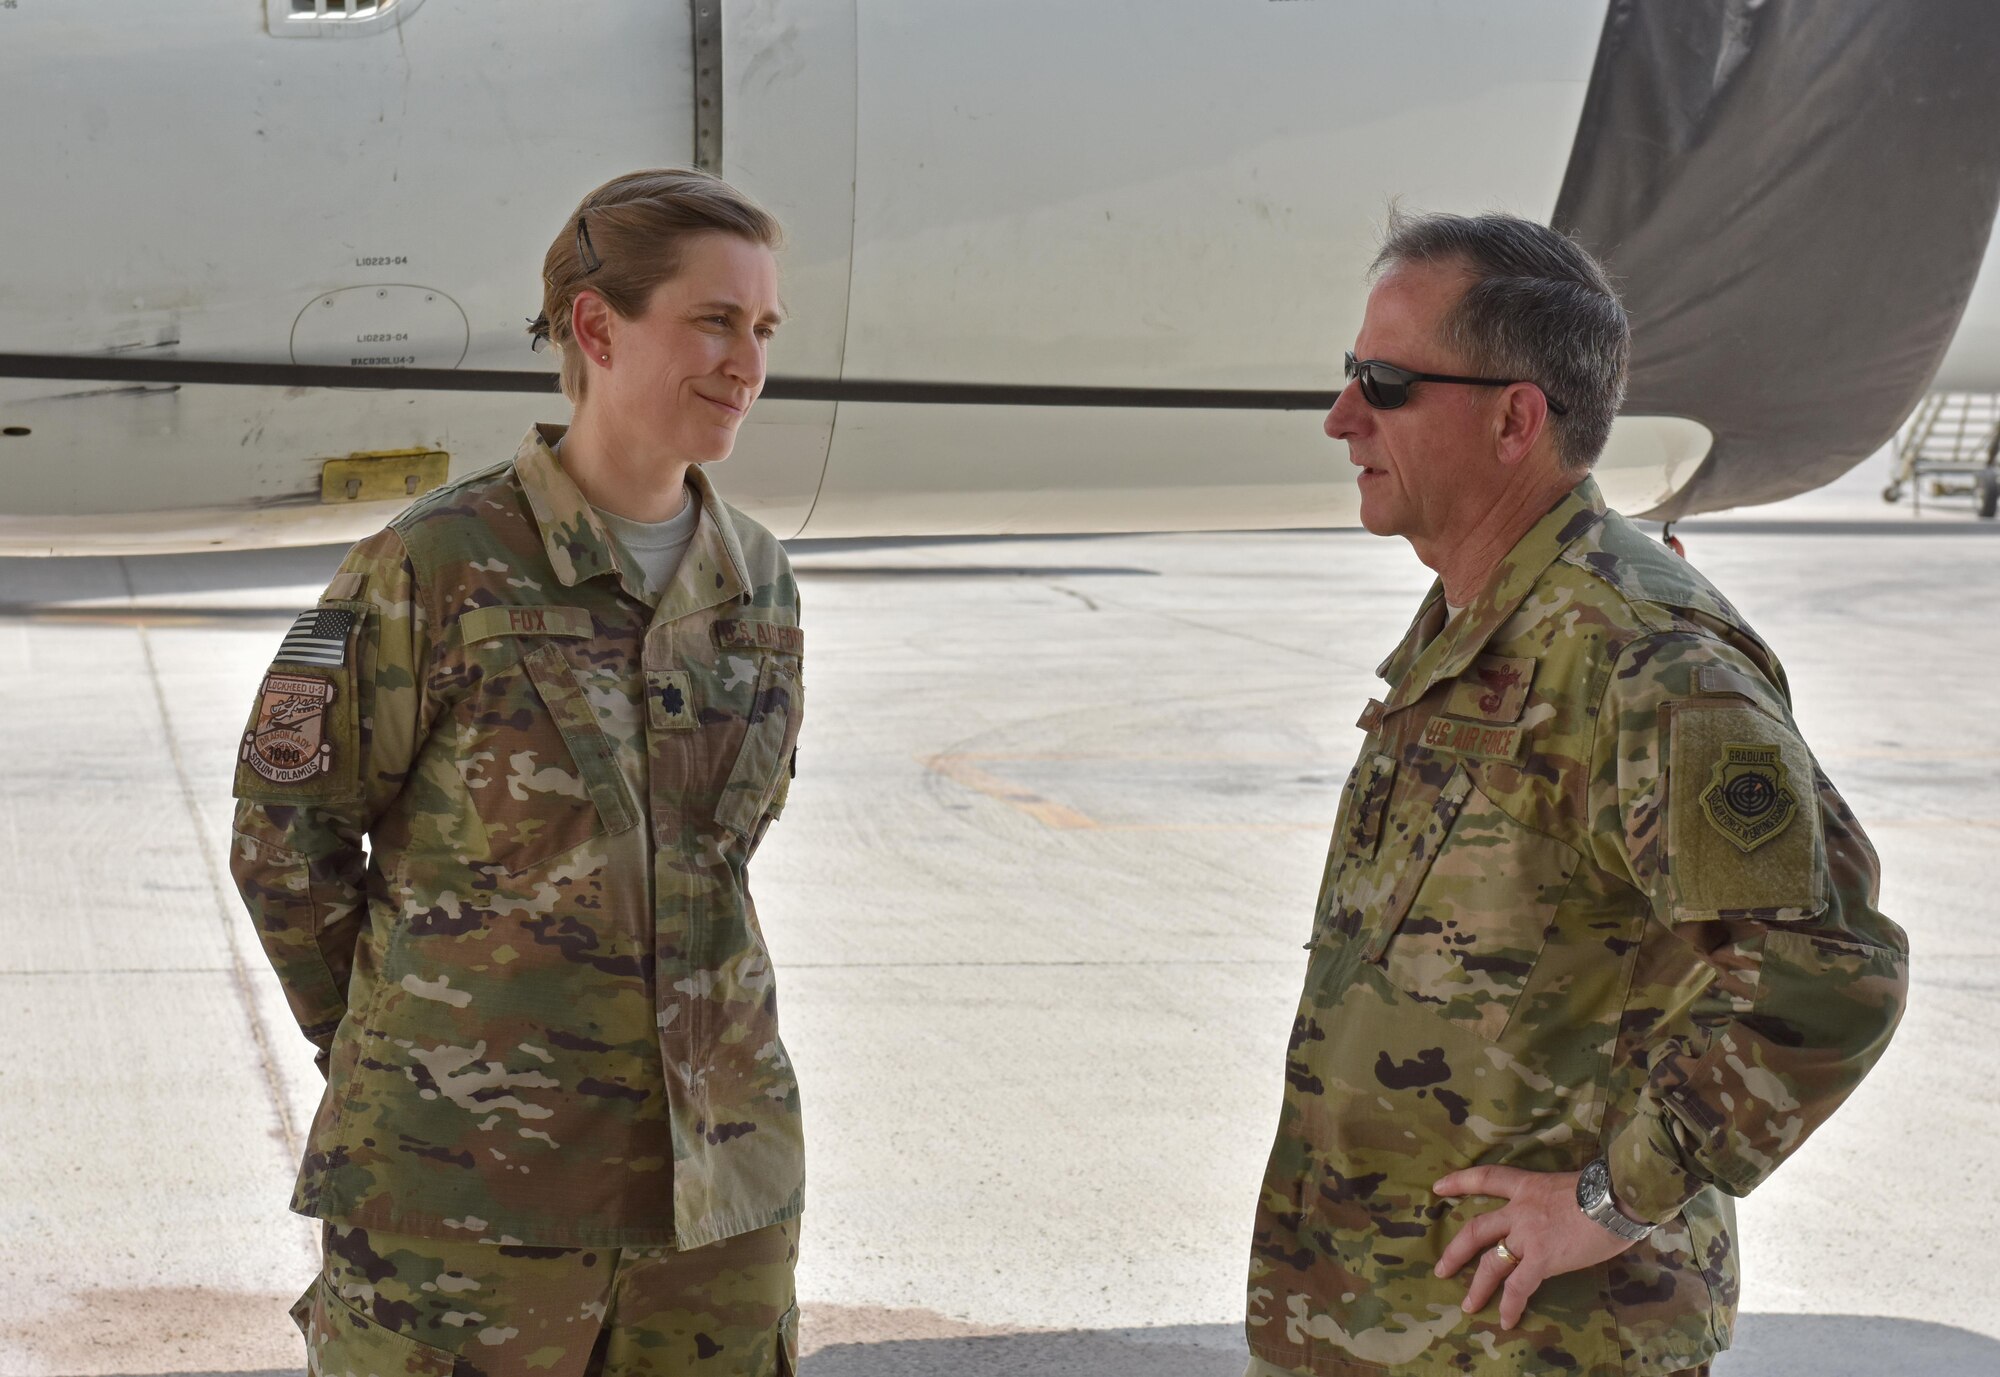 Air Force Chief of Staff Gen. David L. Goldfein speaks with 99th Expeditionary Reconnaissance Squadron Commander Lt. Col. Heather Fox during a visit to Al Dhafra Air Base, United Arab Emirates, Aug. 18, 2017.